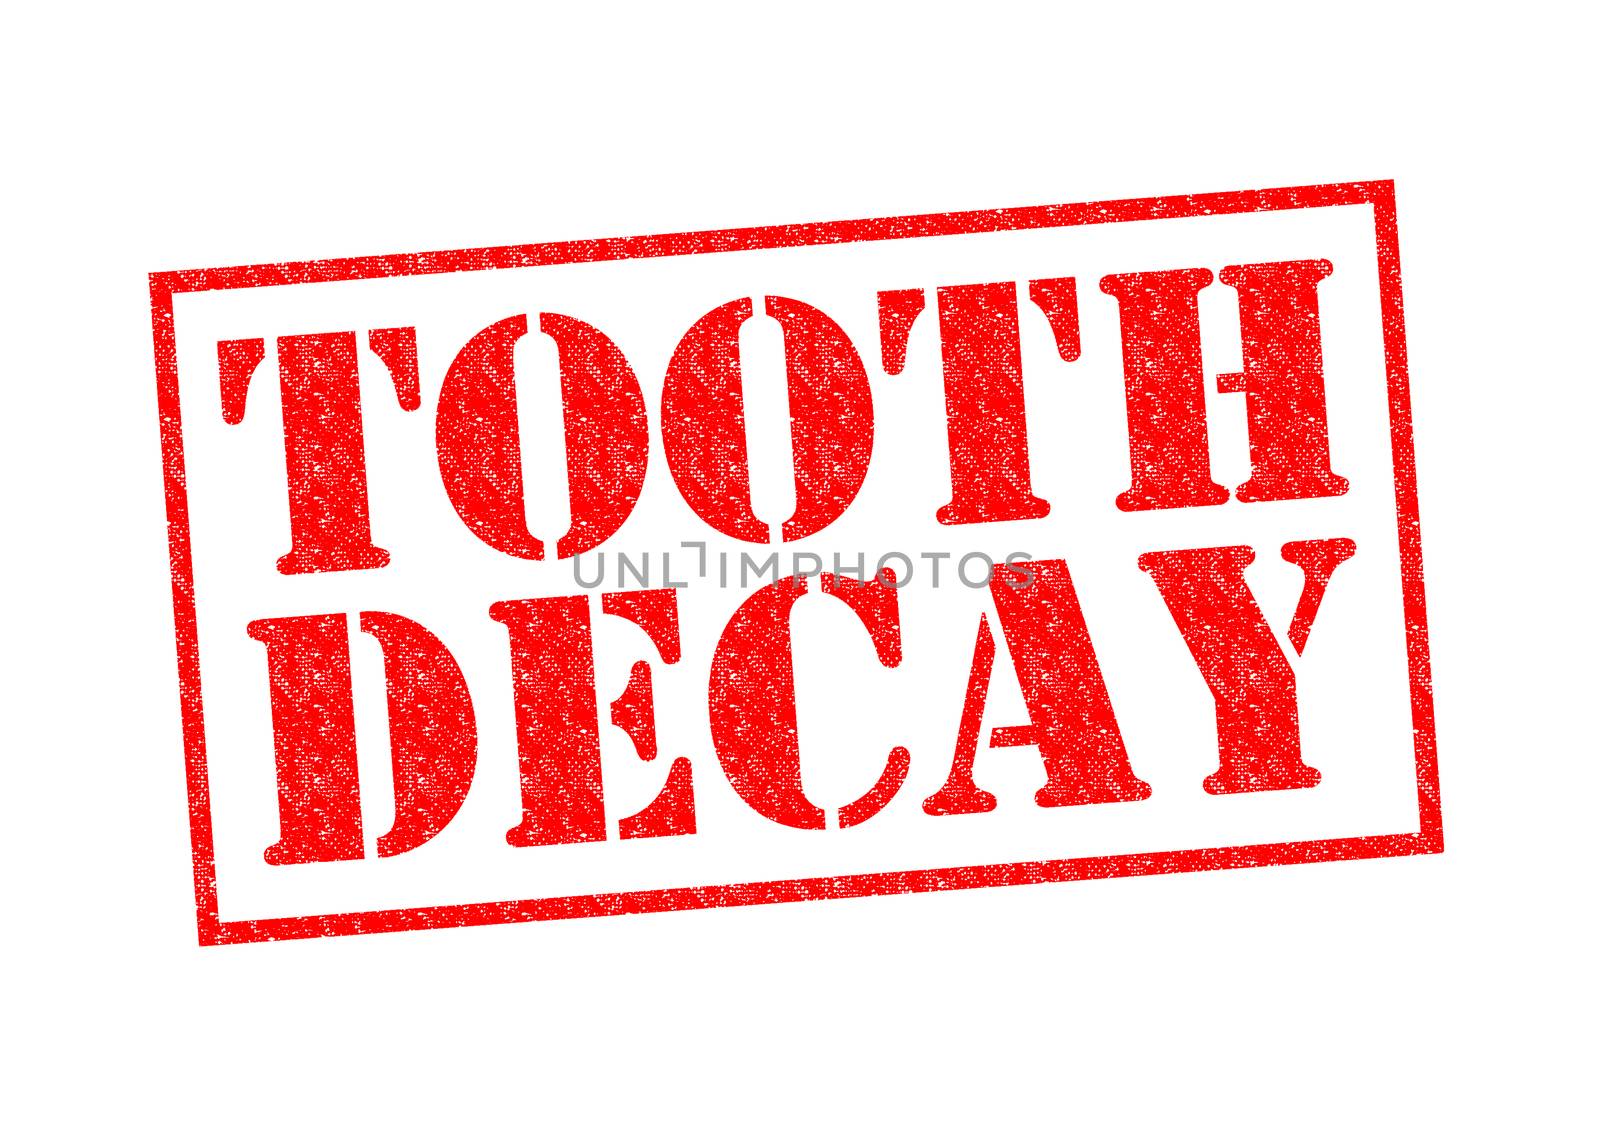 TOOTH DECAY red Rubber Stamp over a white background.